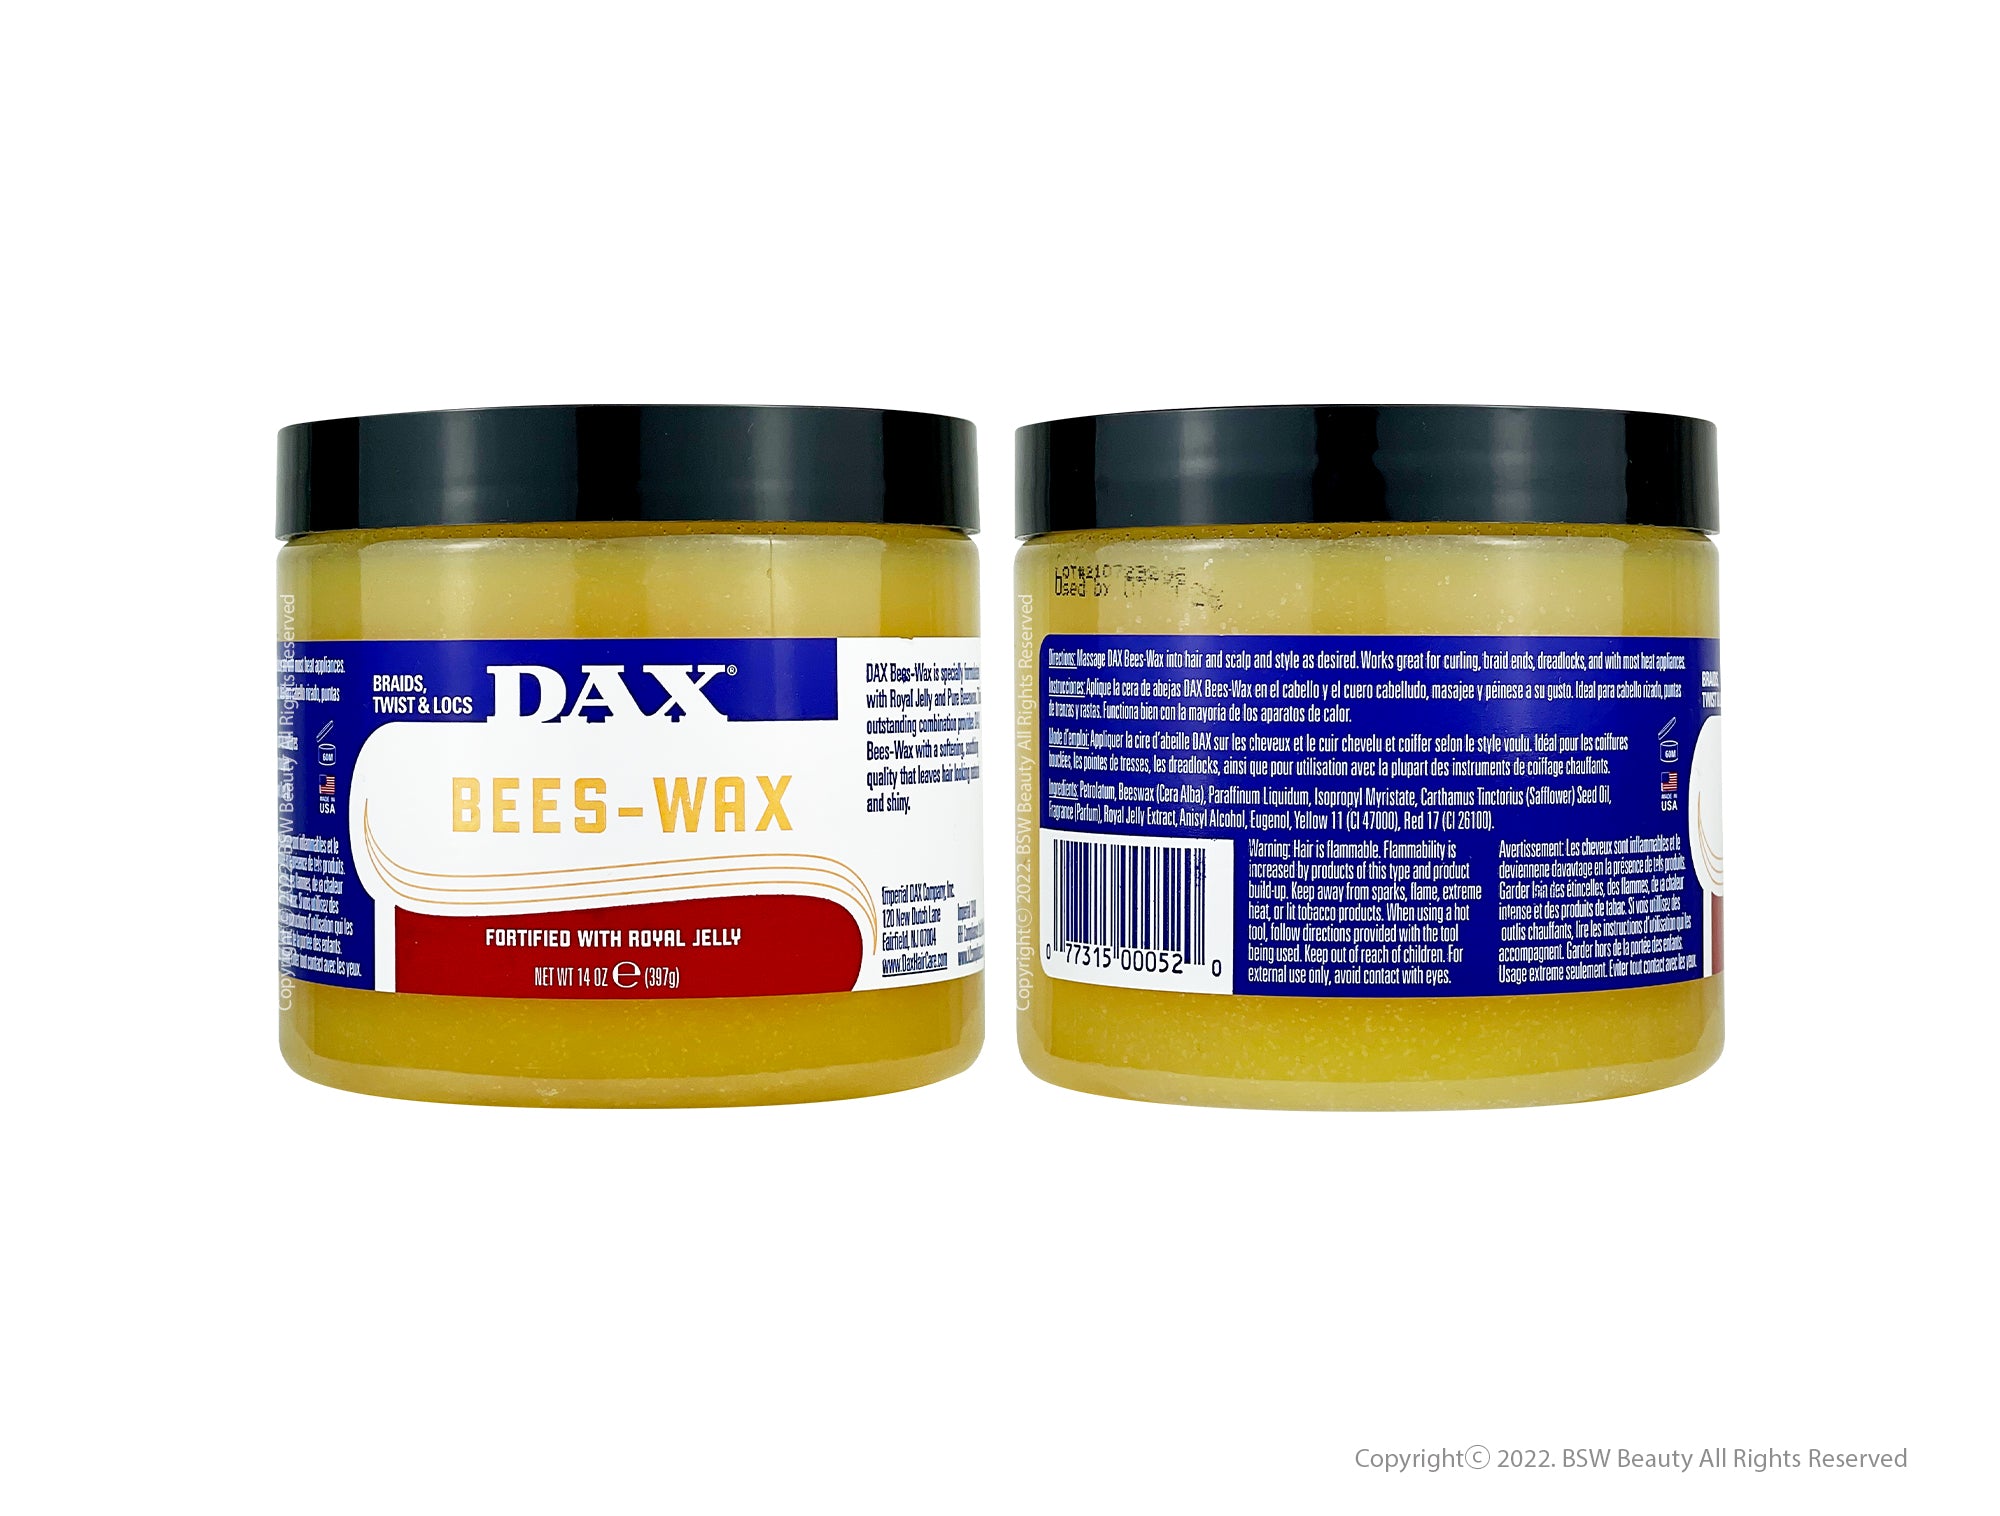 DAX BEES-WAX FORTIFIED WITH ROYAL JELLY 14oz